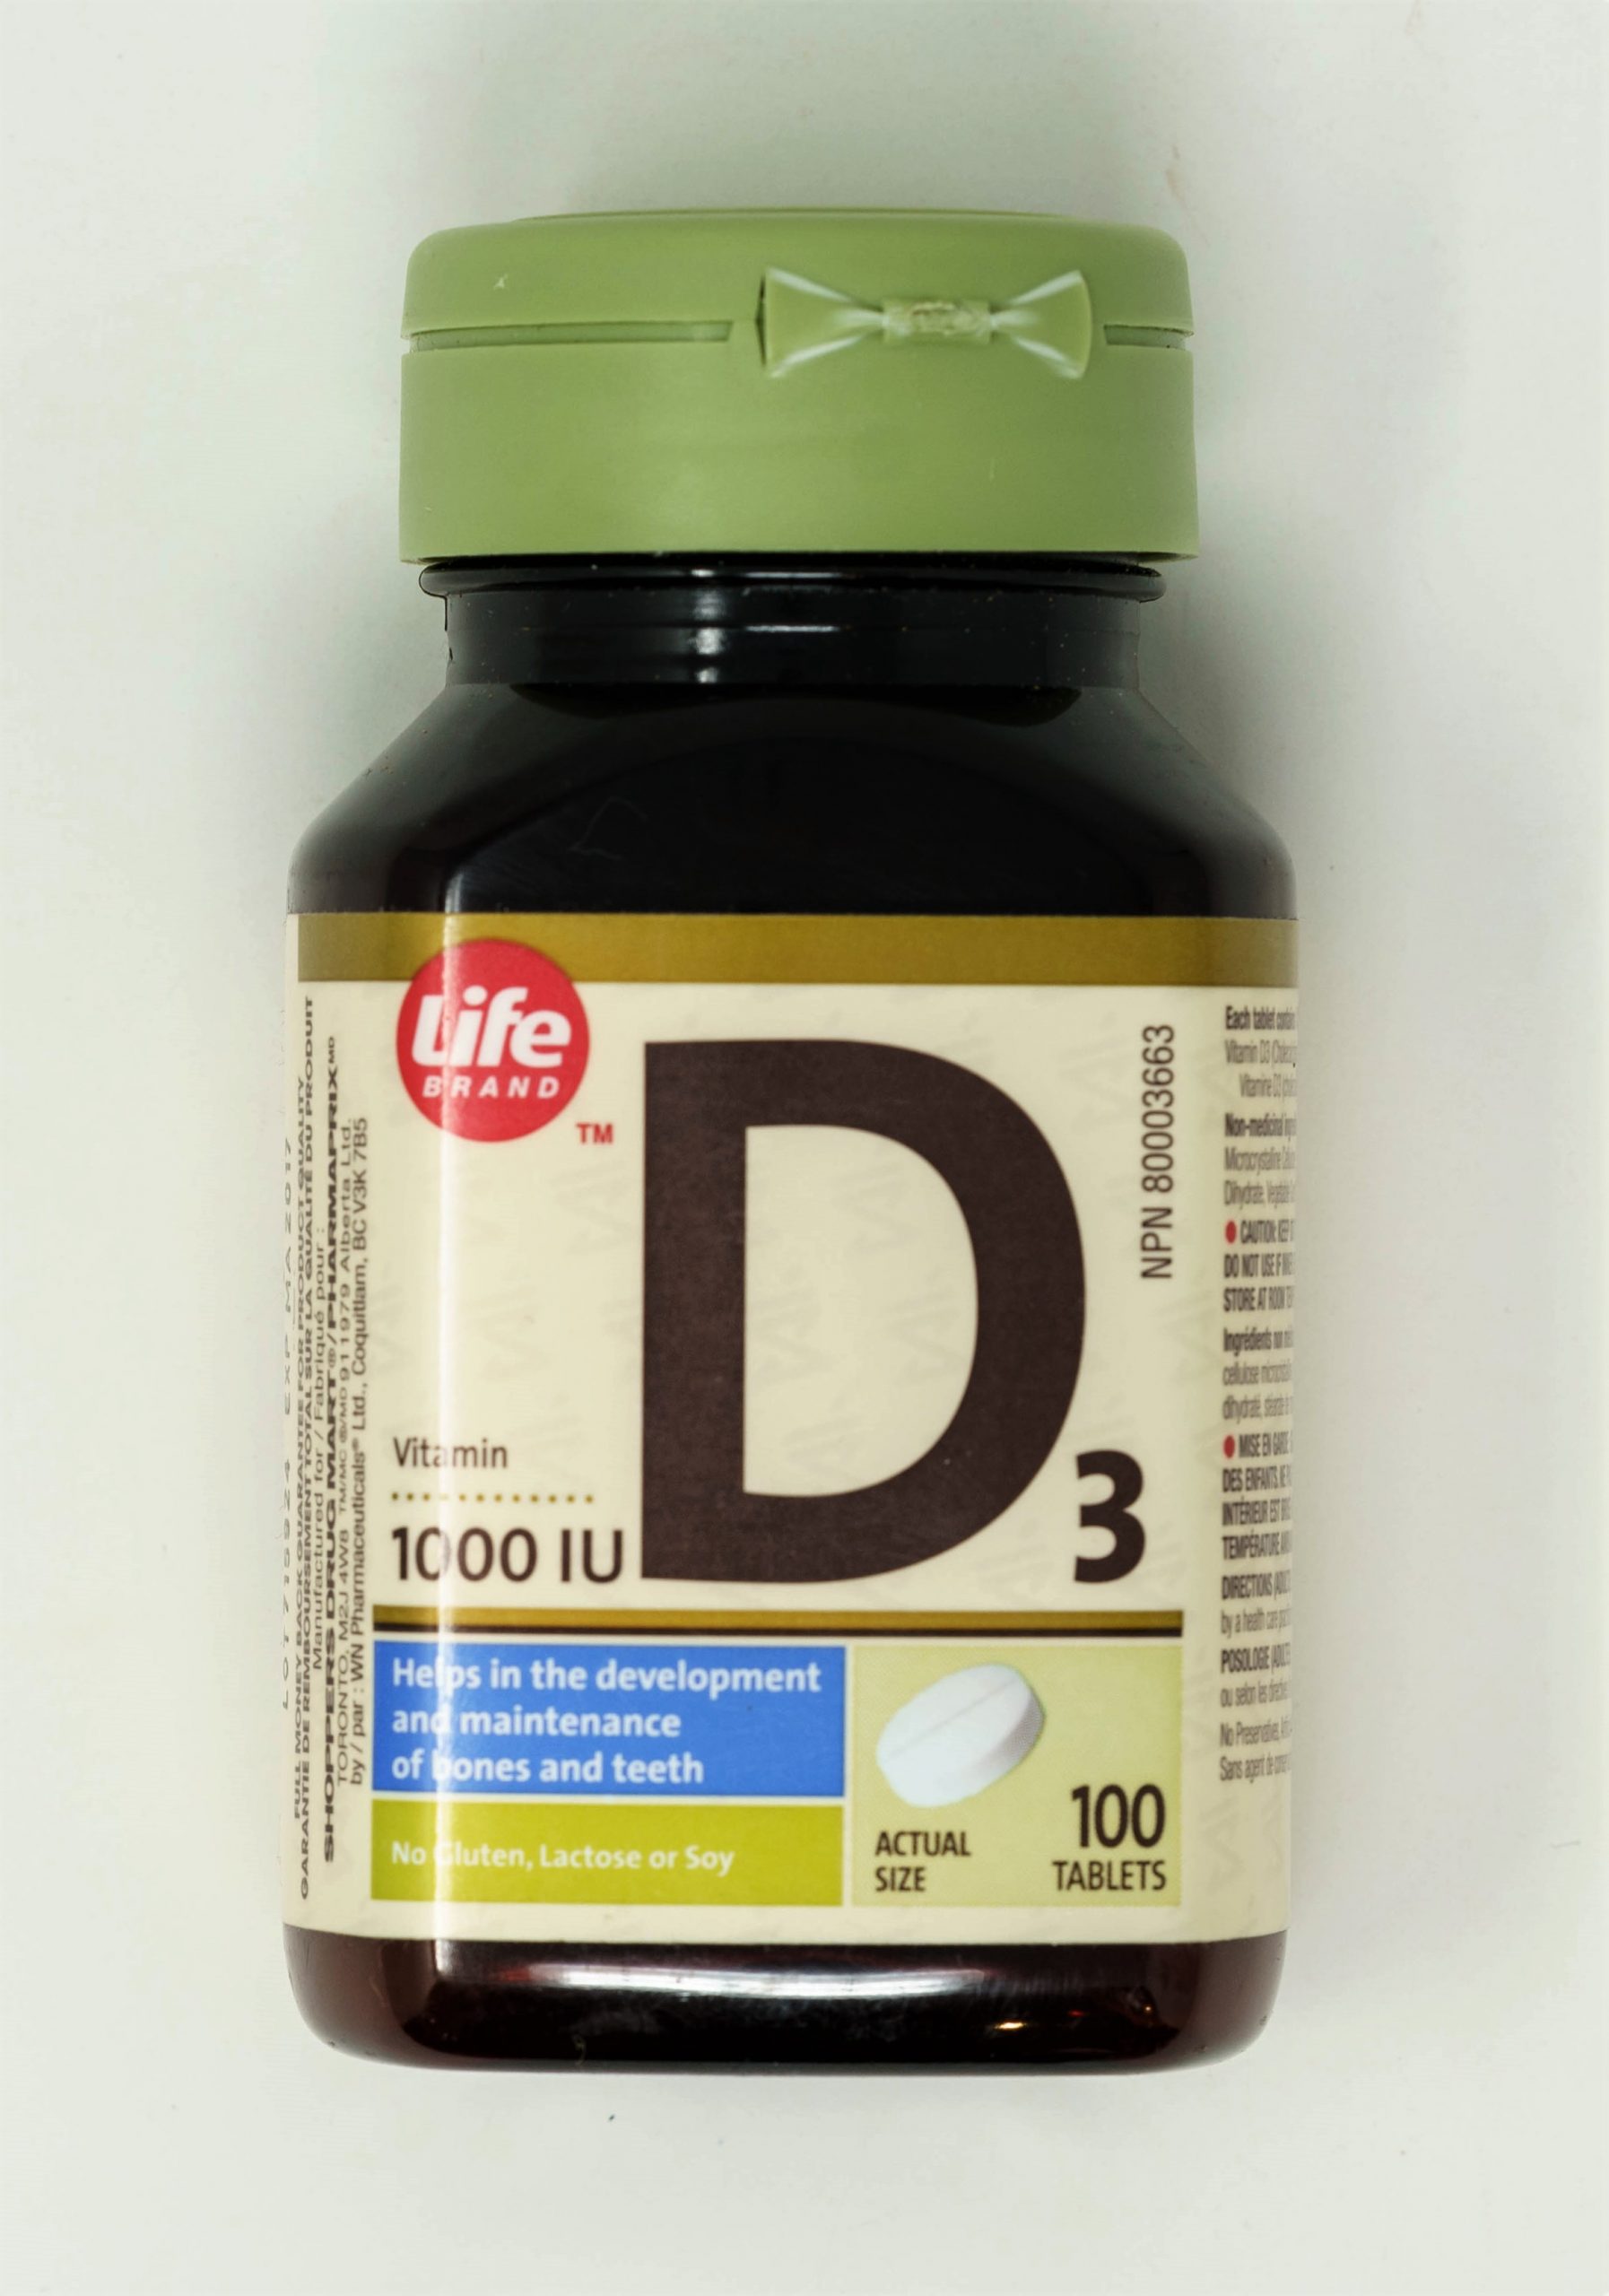 Vitamin D3 bottle. 100 tablets. 1000 IU. The generic name is not on the bottle.